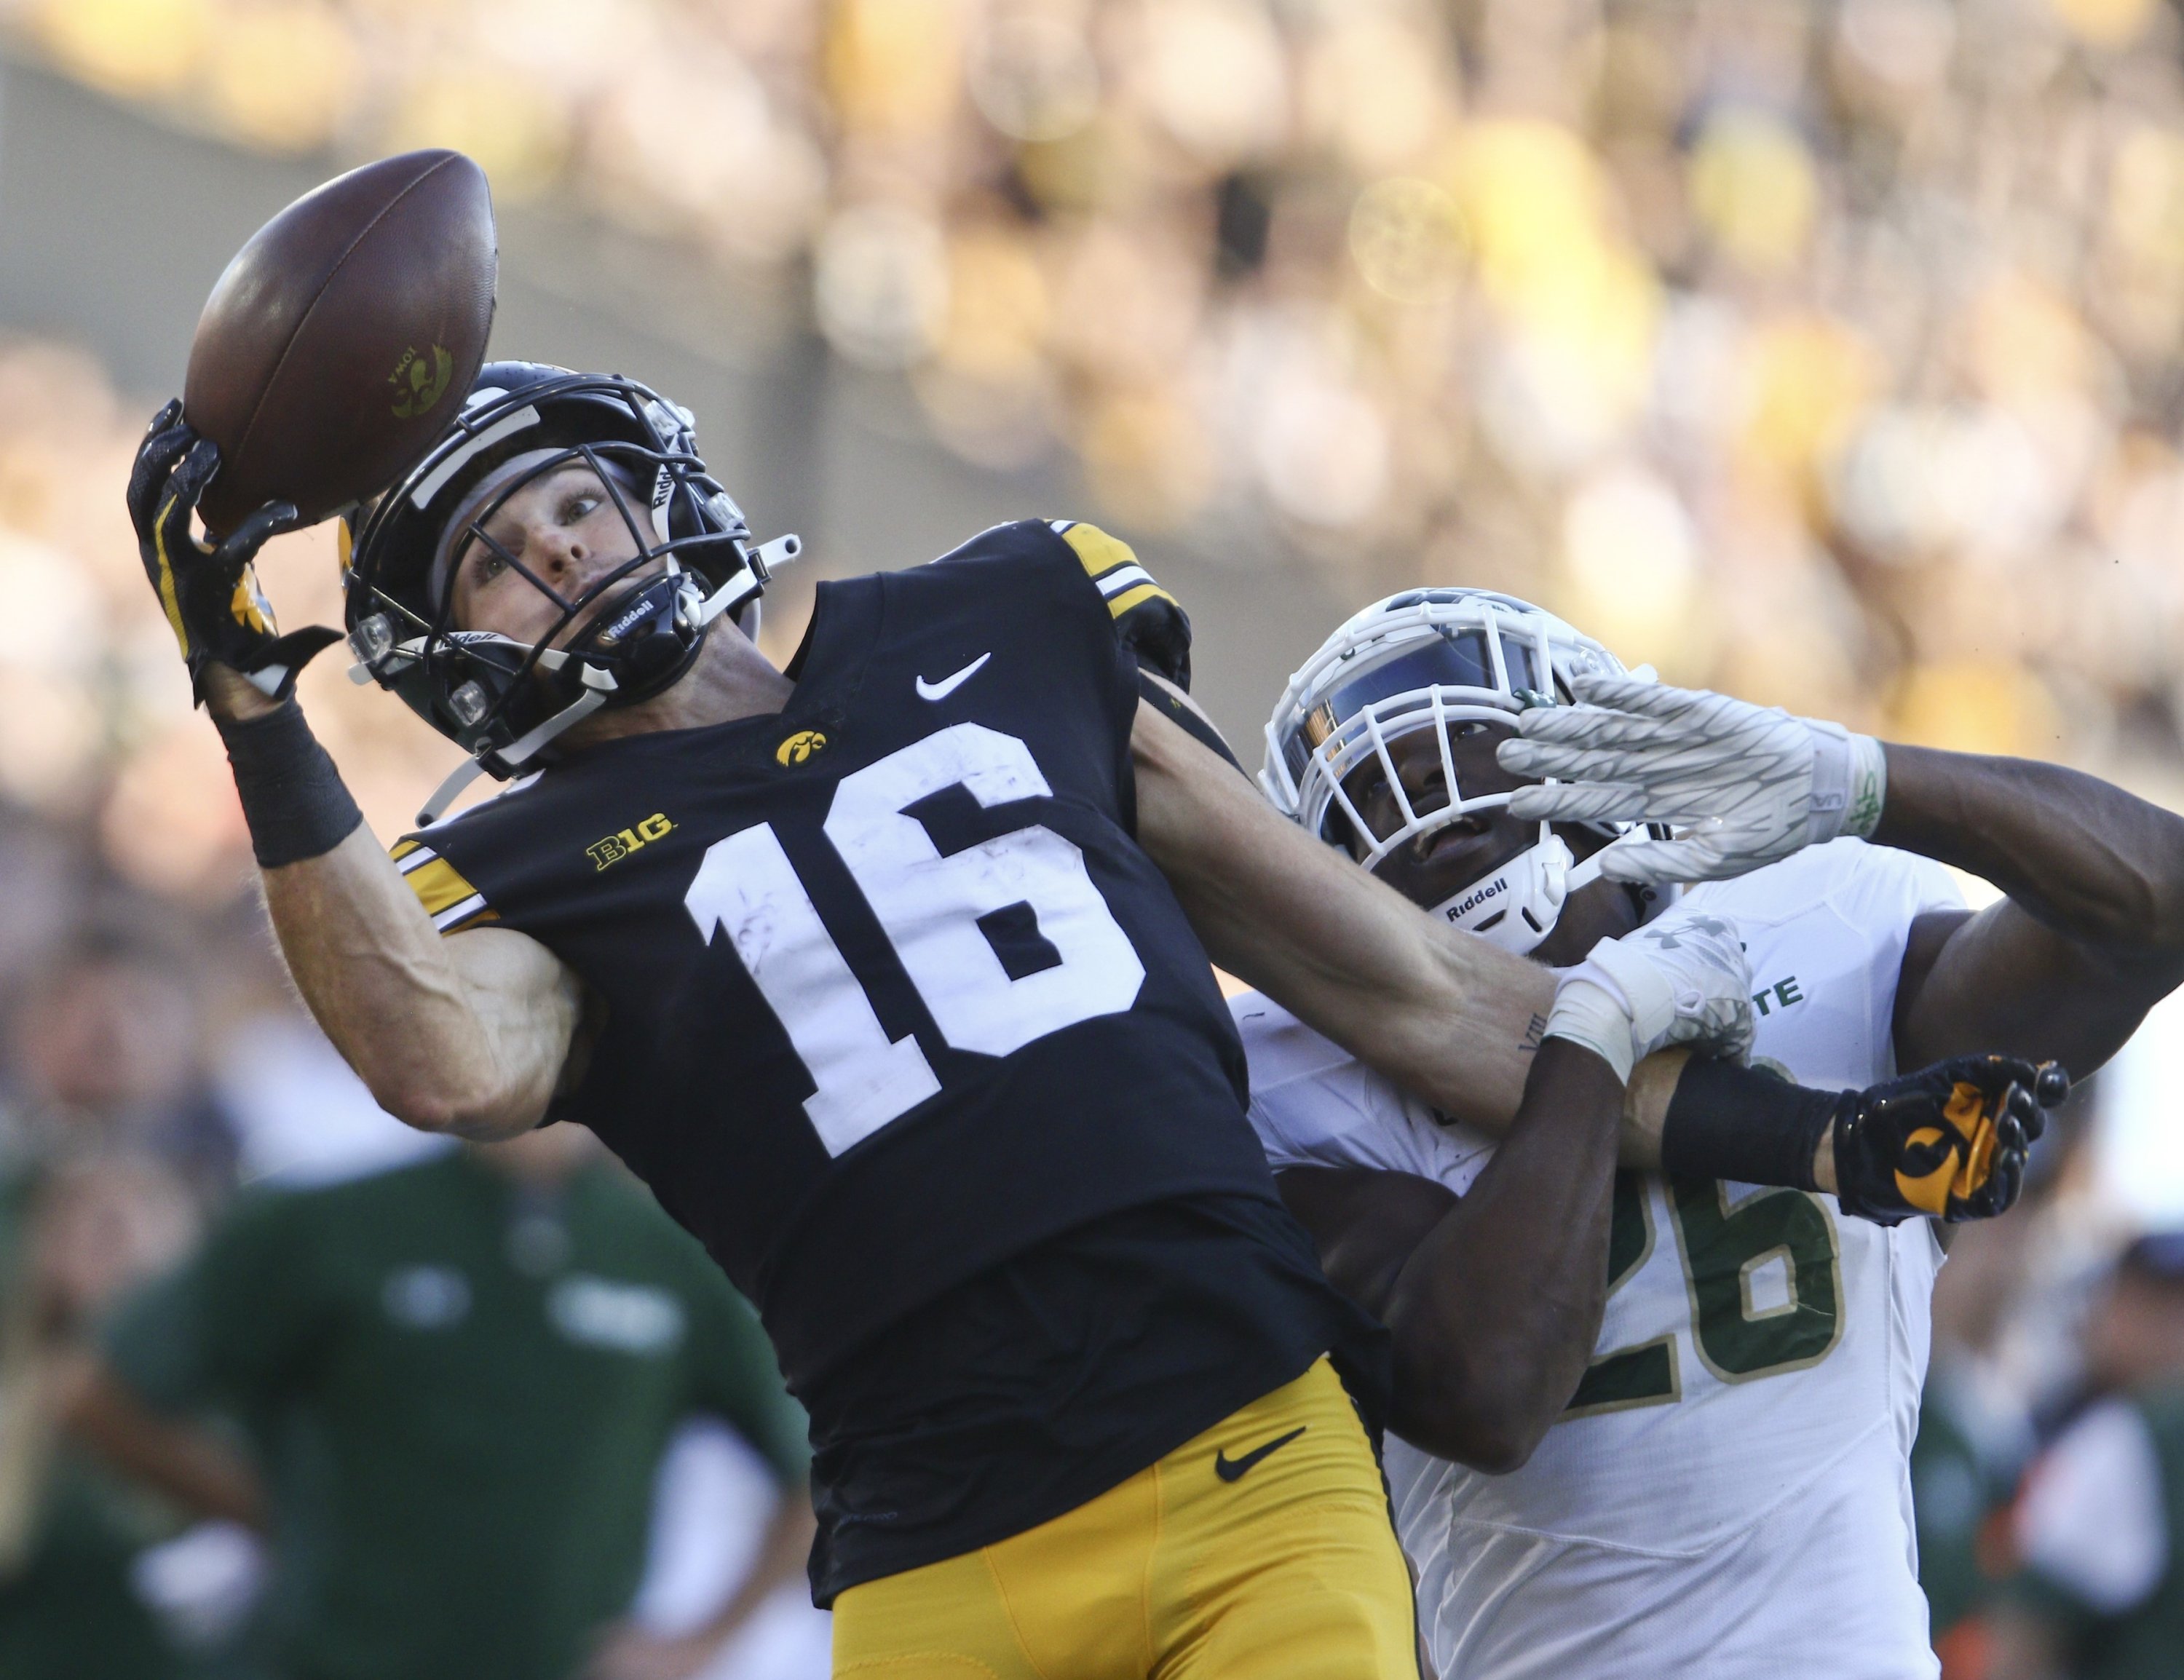 Wide receiver Charlie Jones (16) of the Iowa Hawkeyes has a pass broken up during the second half by defensive back Marshaun Cameron (26) of the Colorado State Rams at Kinnick Stadium, Iowa City, Iowa, U.S., Sept. 25, 2021. (AFP Photo)